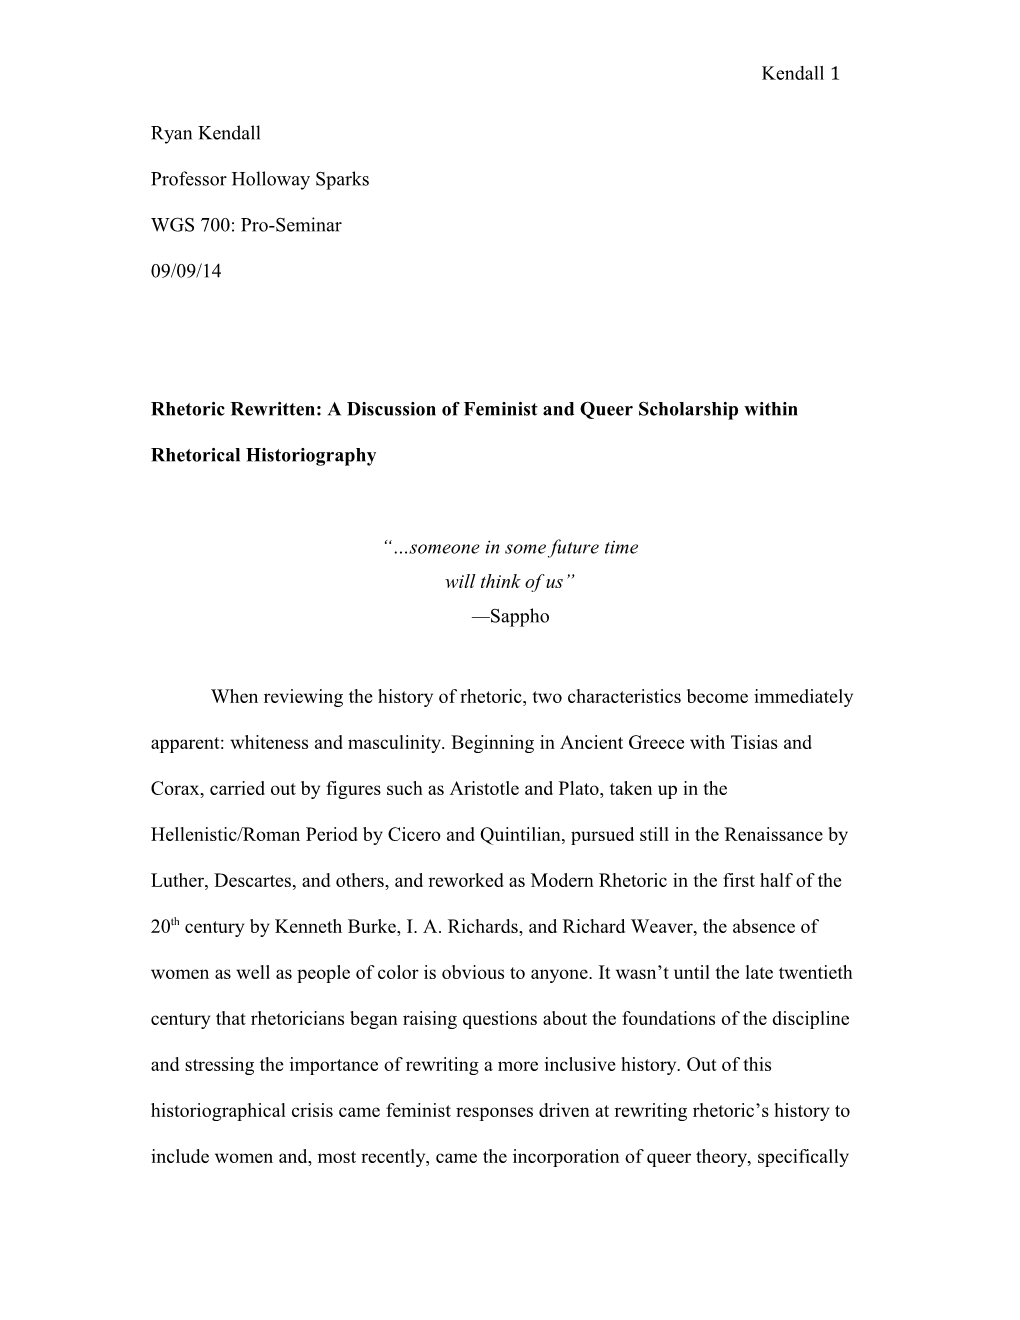 Rhetoric Rewritten: a Discussion of Feminist and Queer Scholarship Within Rhetorical